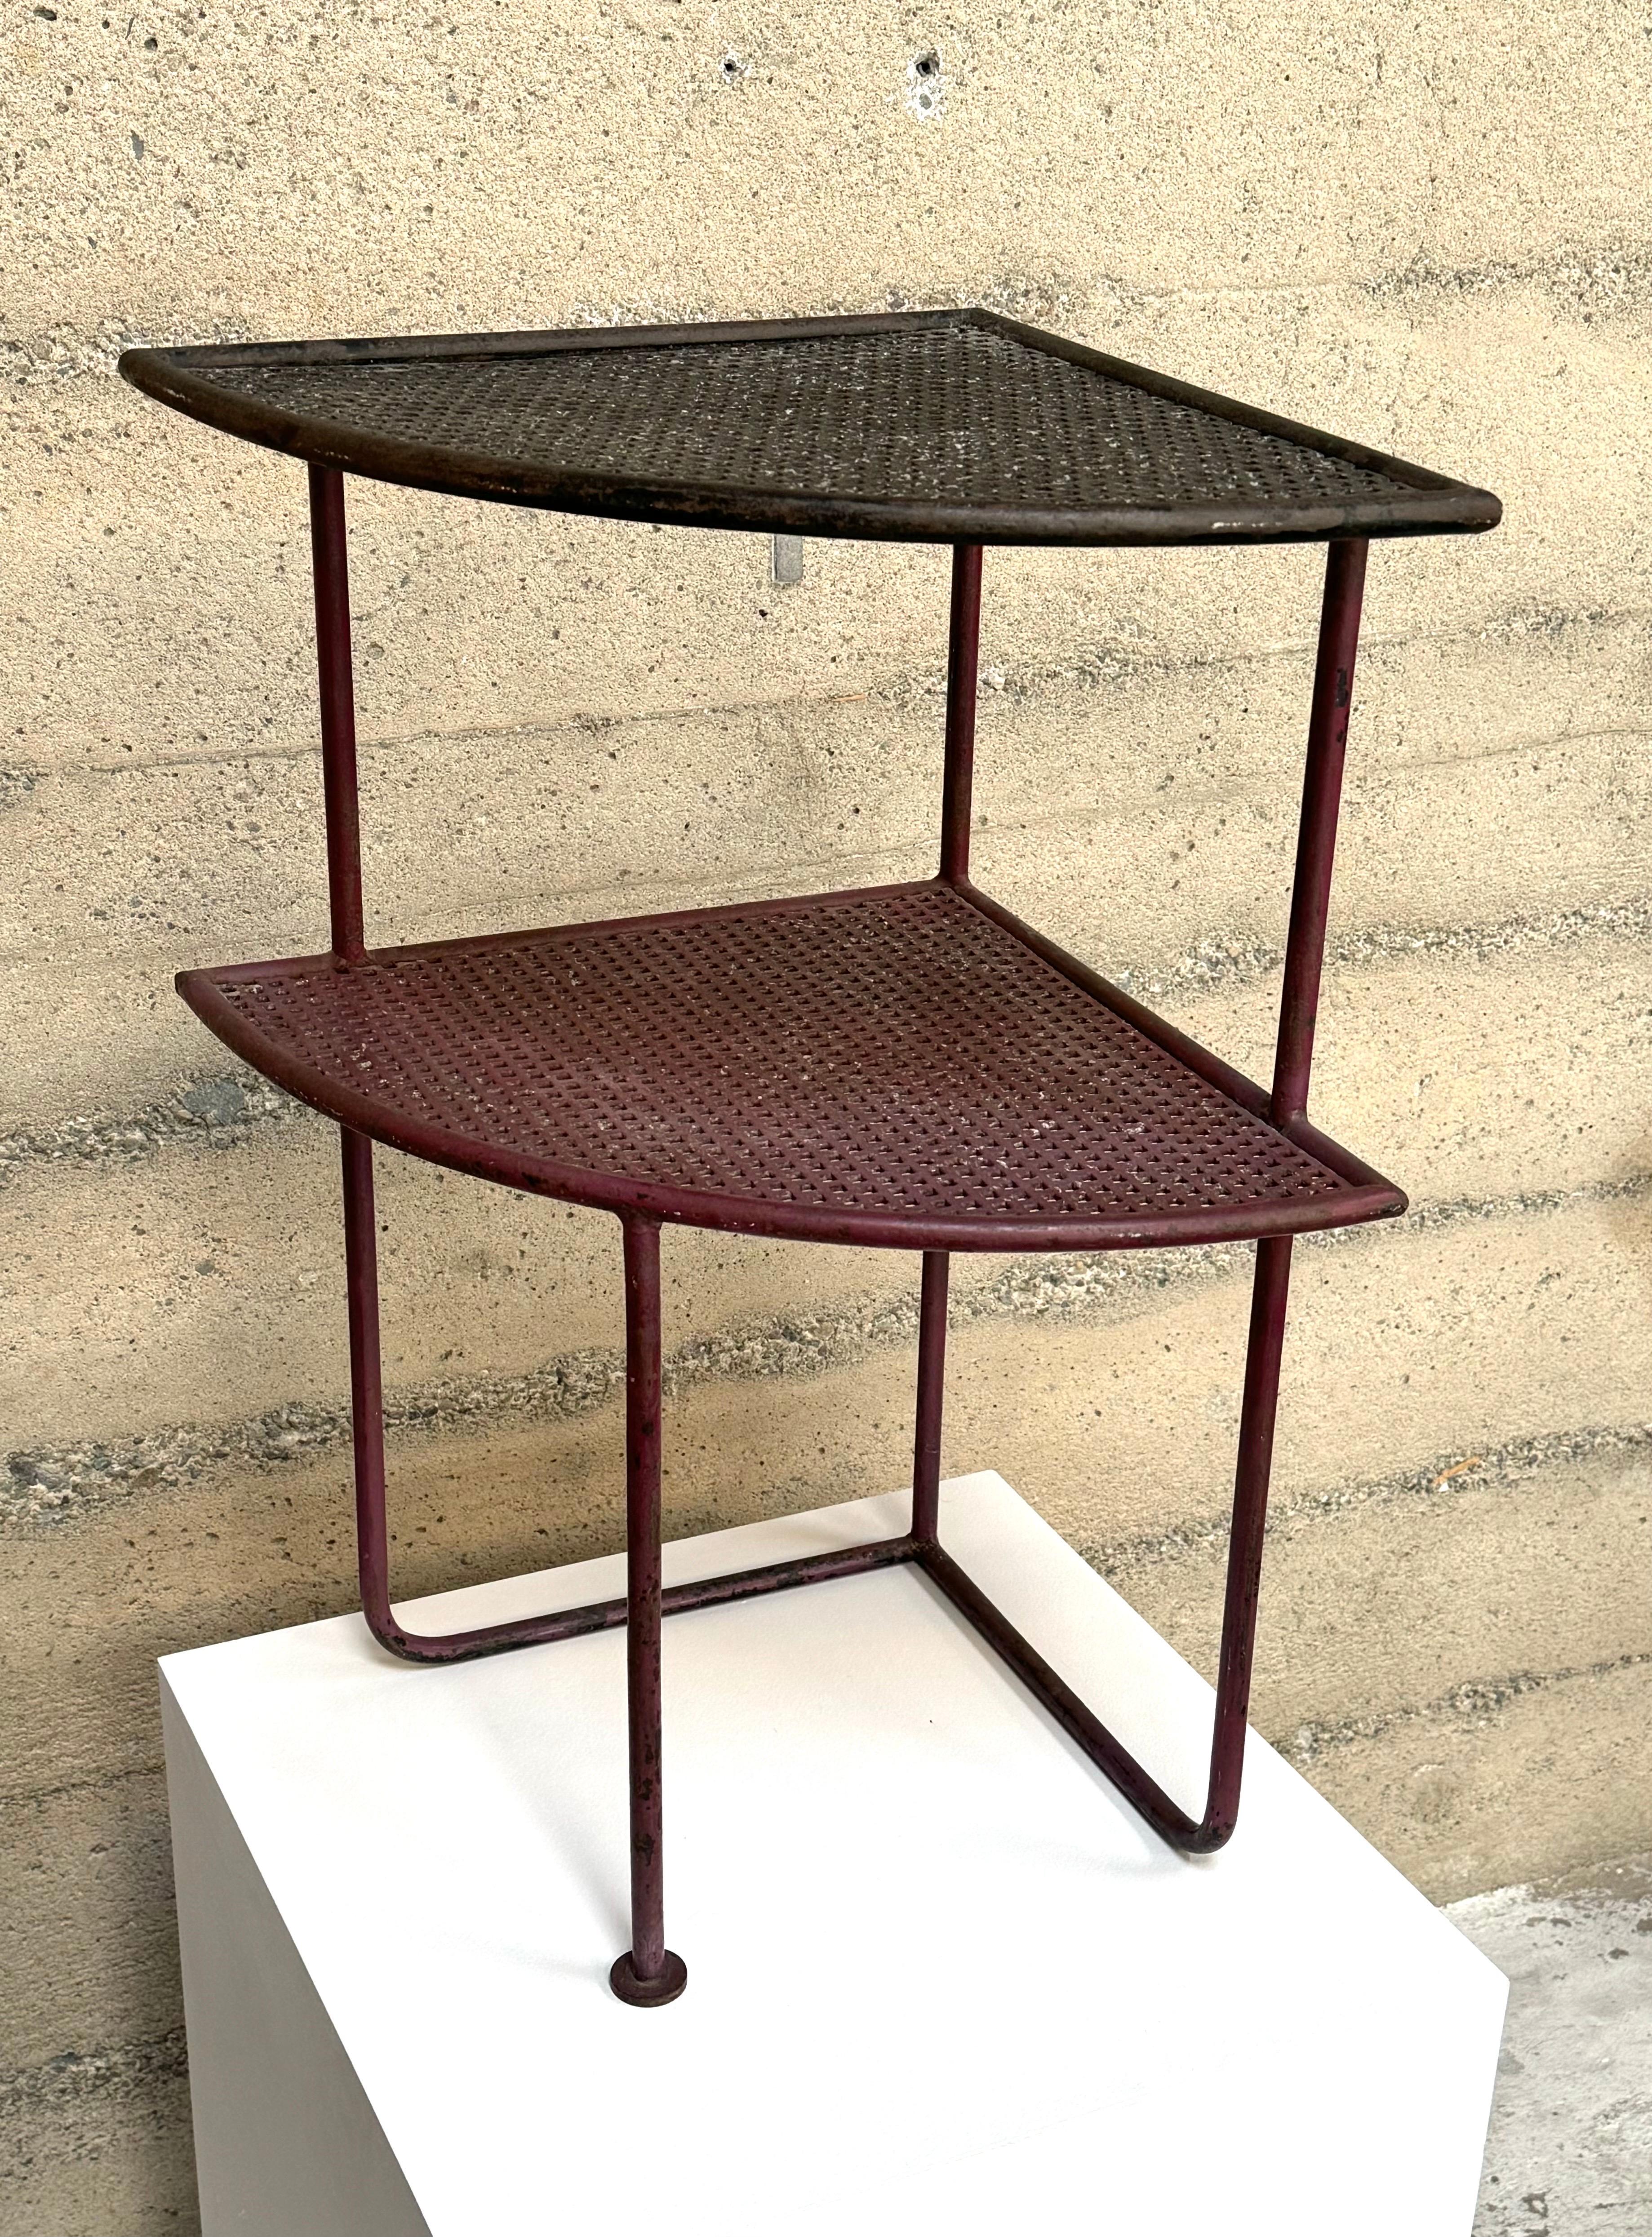 Mid-20th Century 1950s Modernist French Iron with Perforated Metal Shelves Side Table For Sale